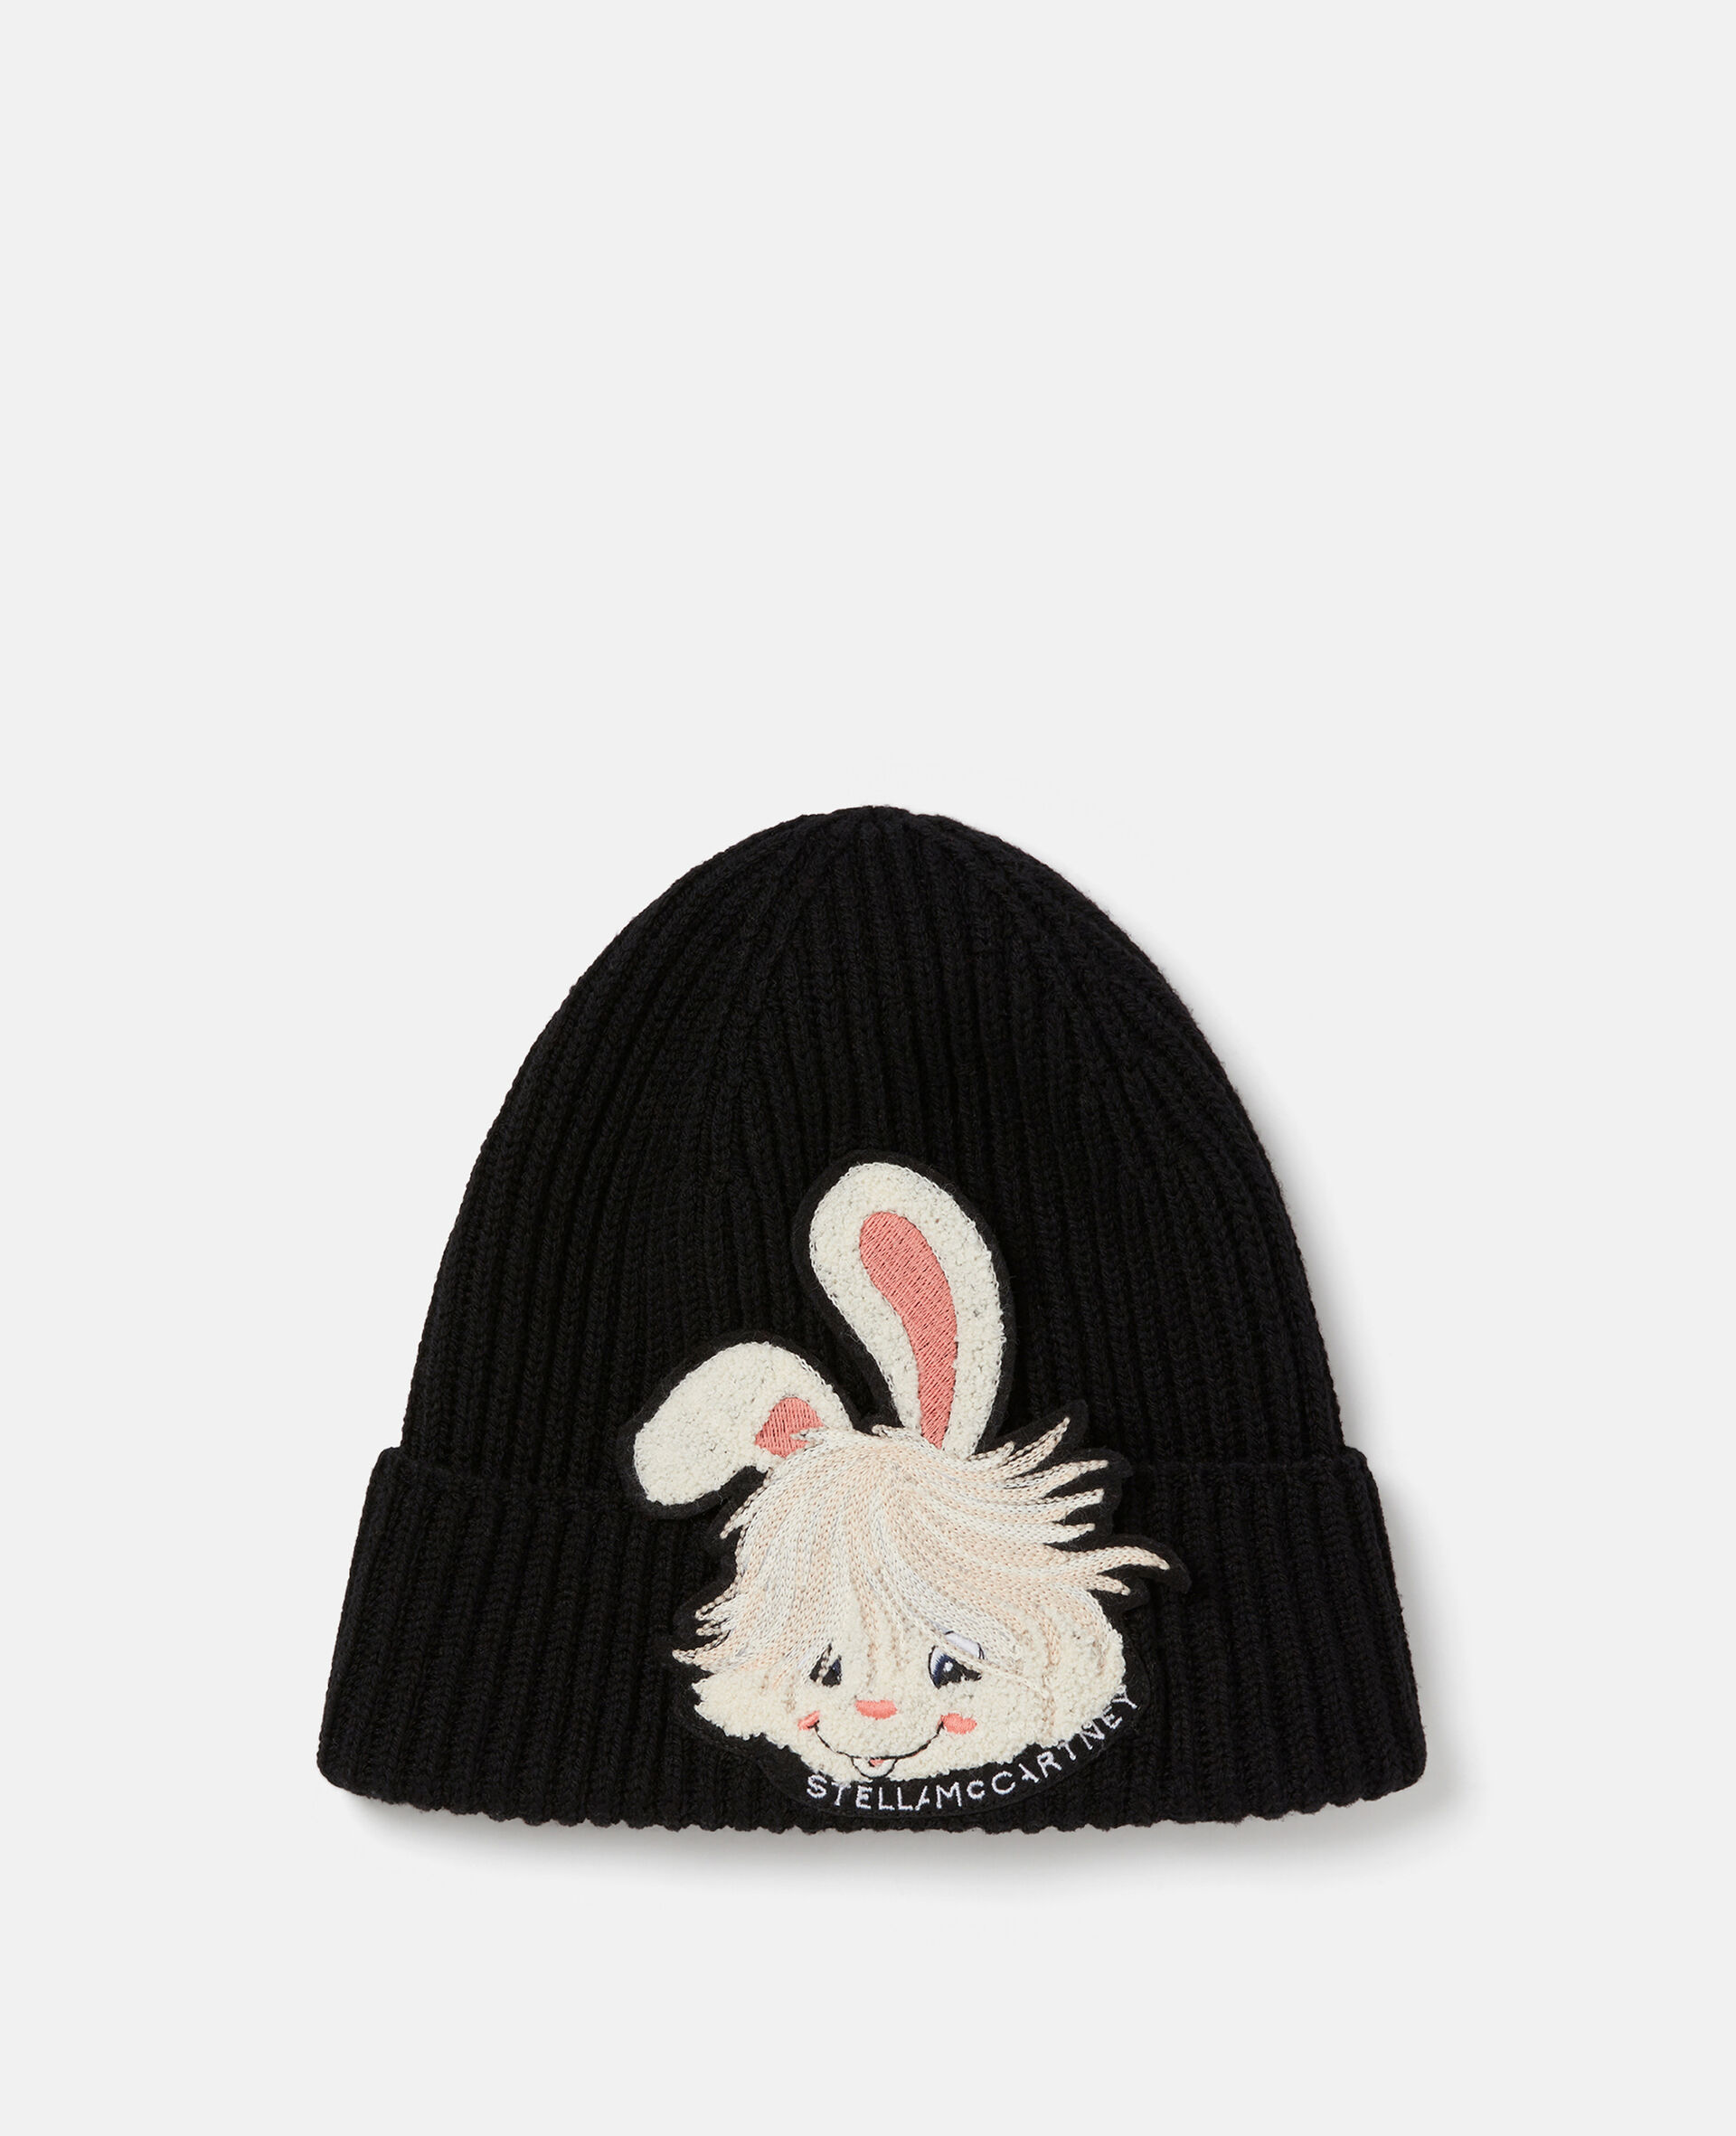 Lunar New Year Rabbit Motif Knitted Beanie Hat-Black-large image number 0